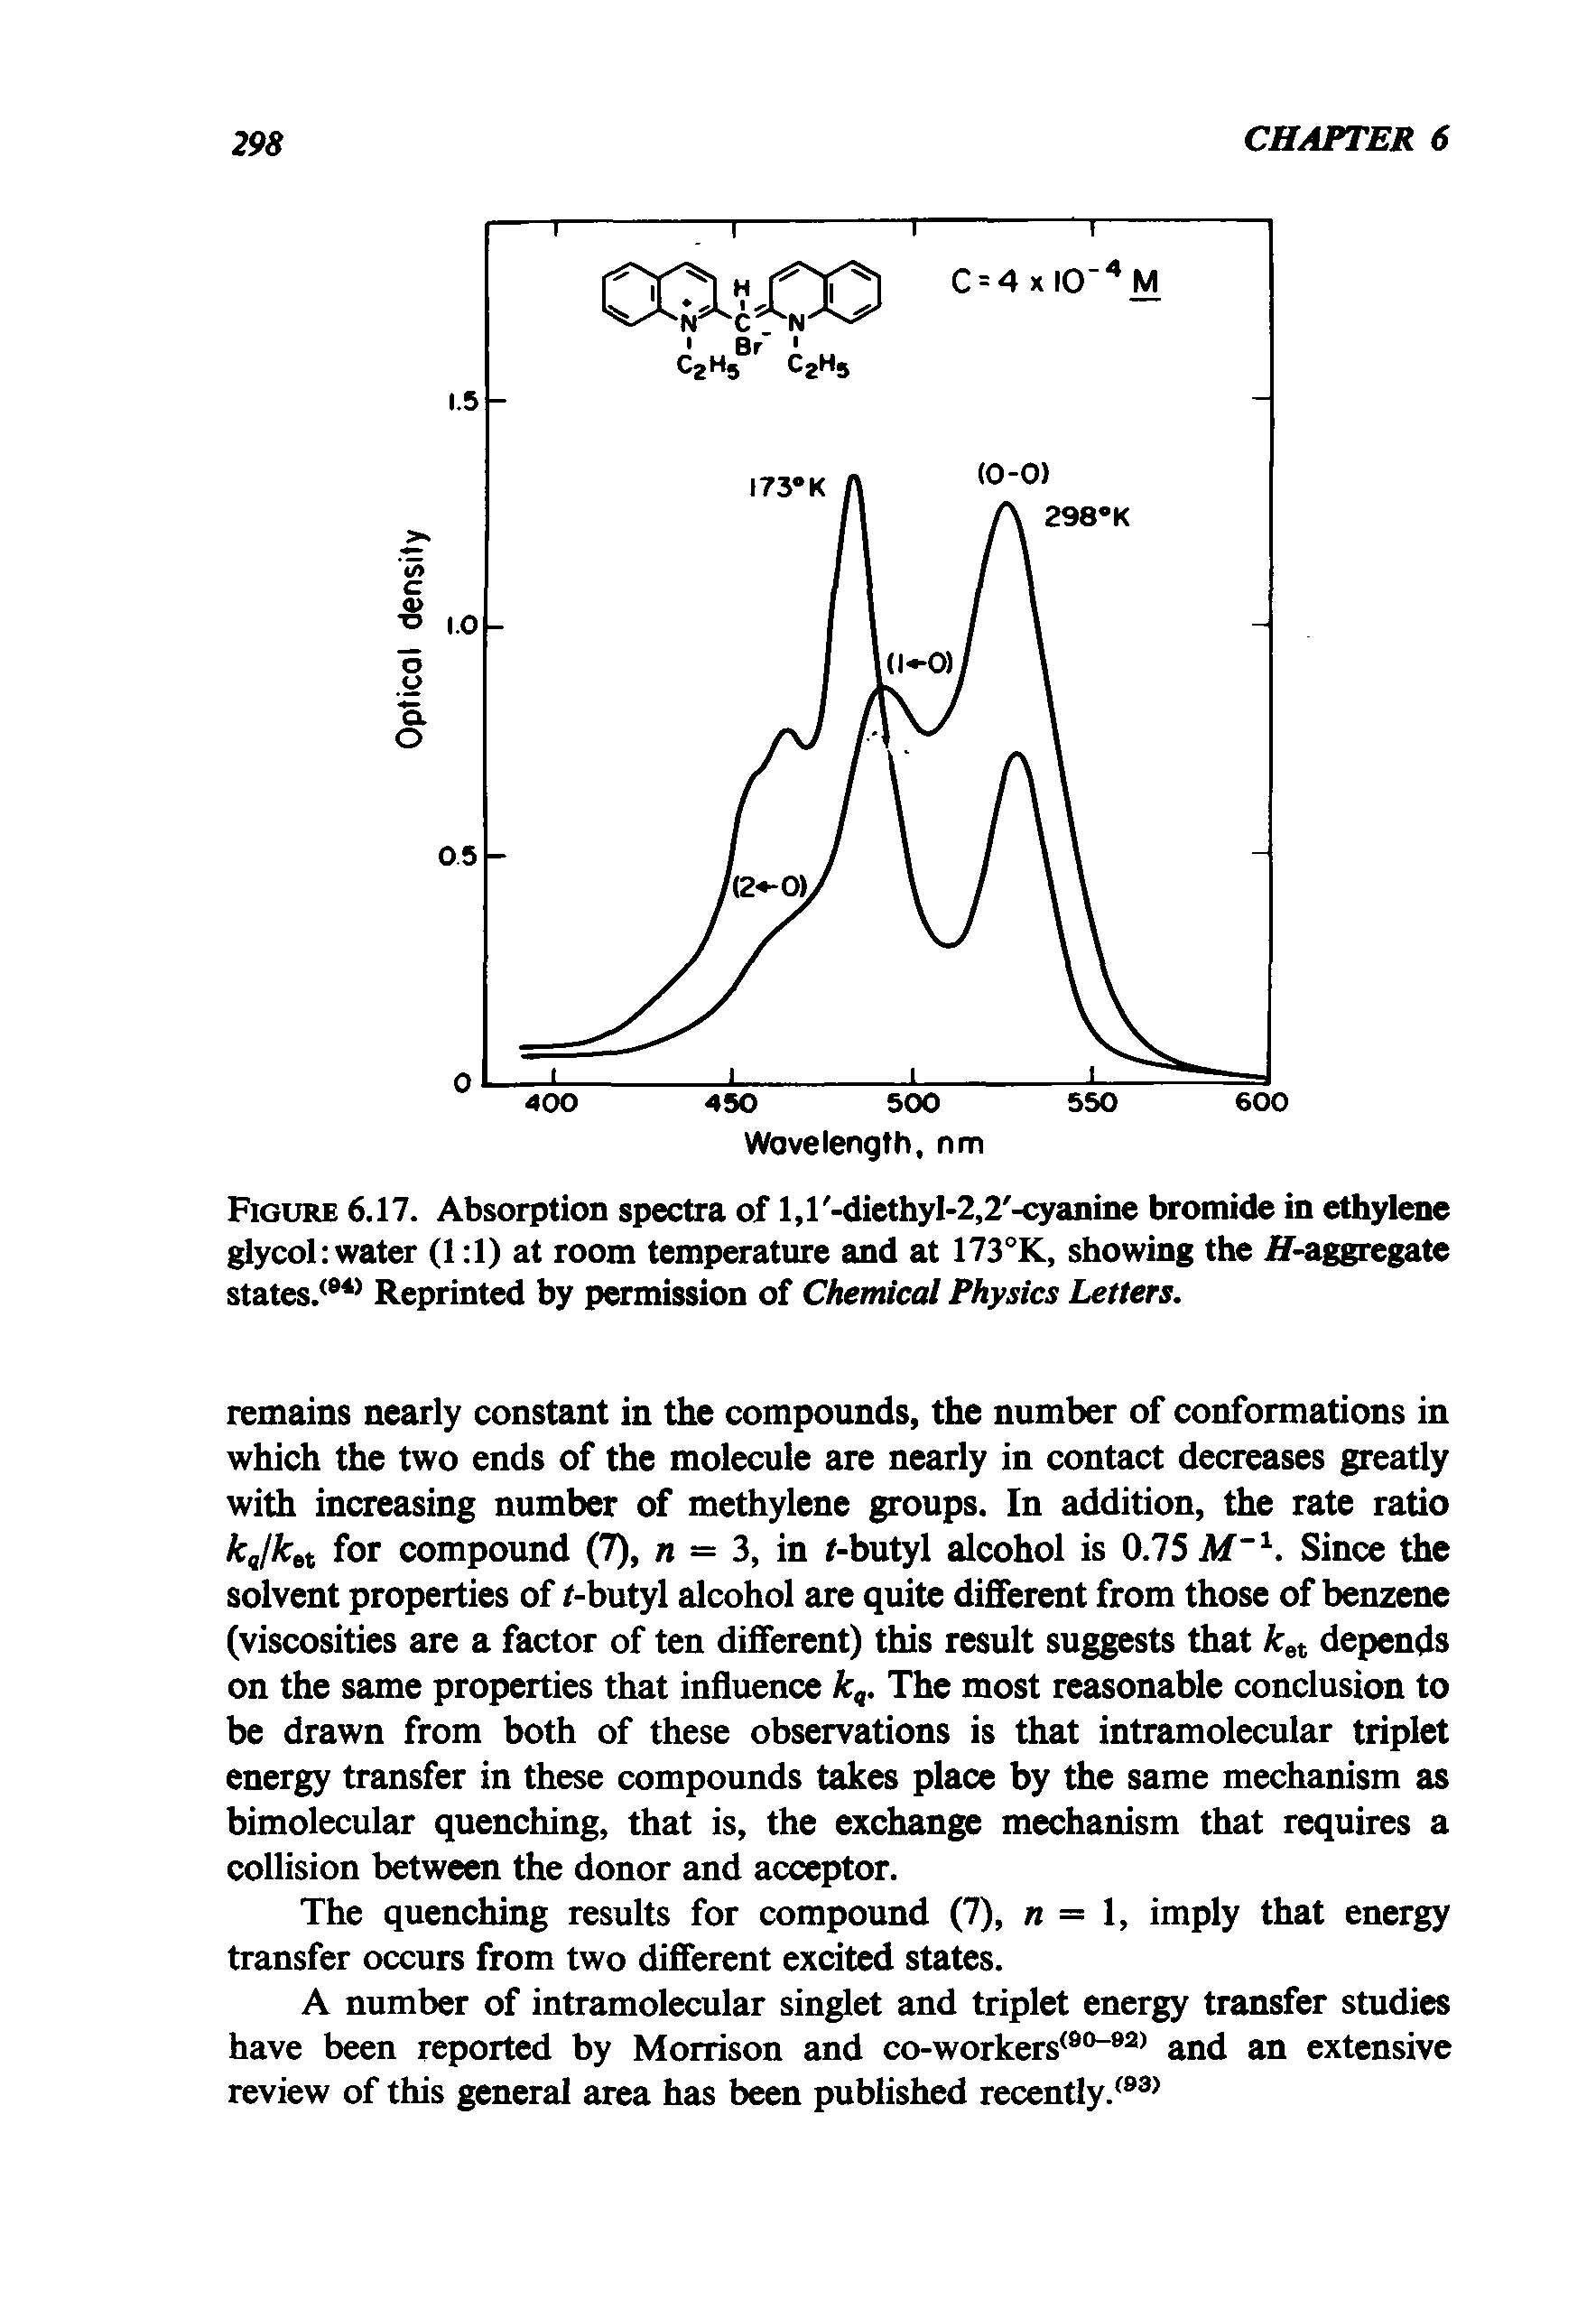 Figure 6.17. Absorption spectra of l,r-diethyI-2,2 -cyanine bromide in ethylene glycol water (1 1) at room temperature and at 173°K, showing the //-aggregate states.(84> Reprinted by permission of Chemical Physics Letters.